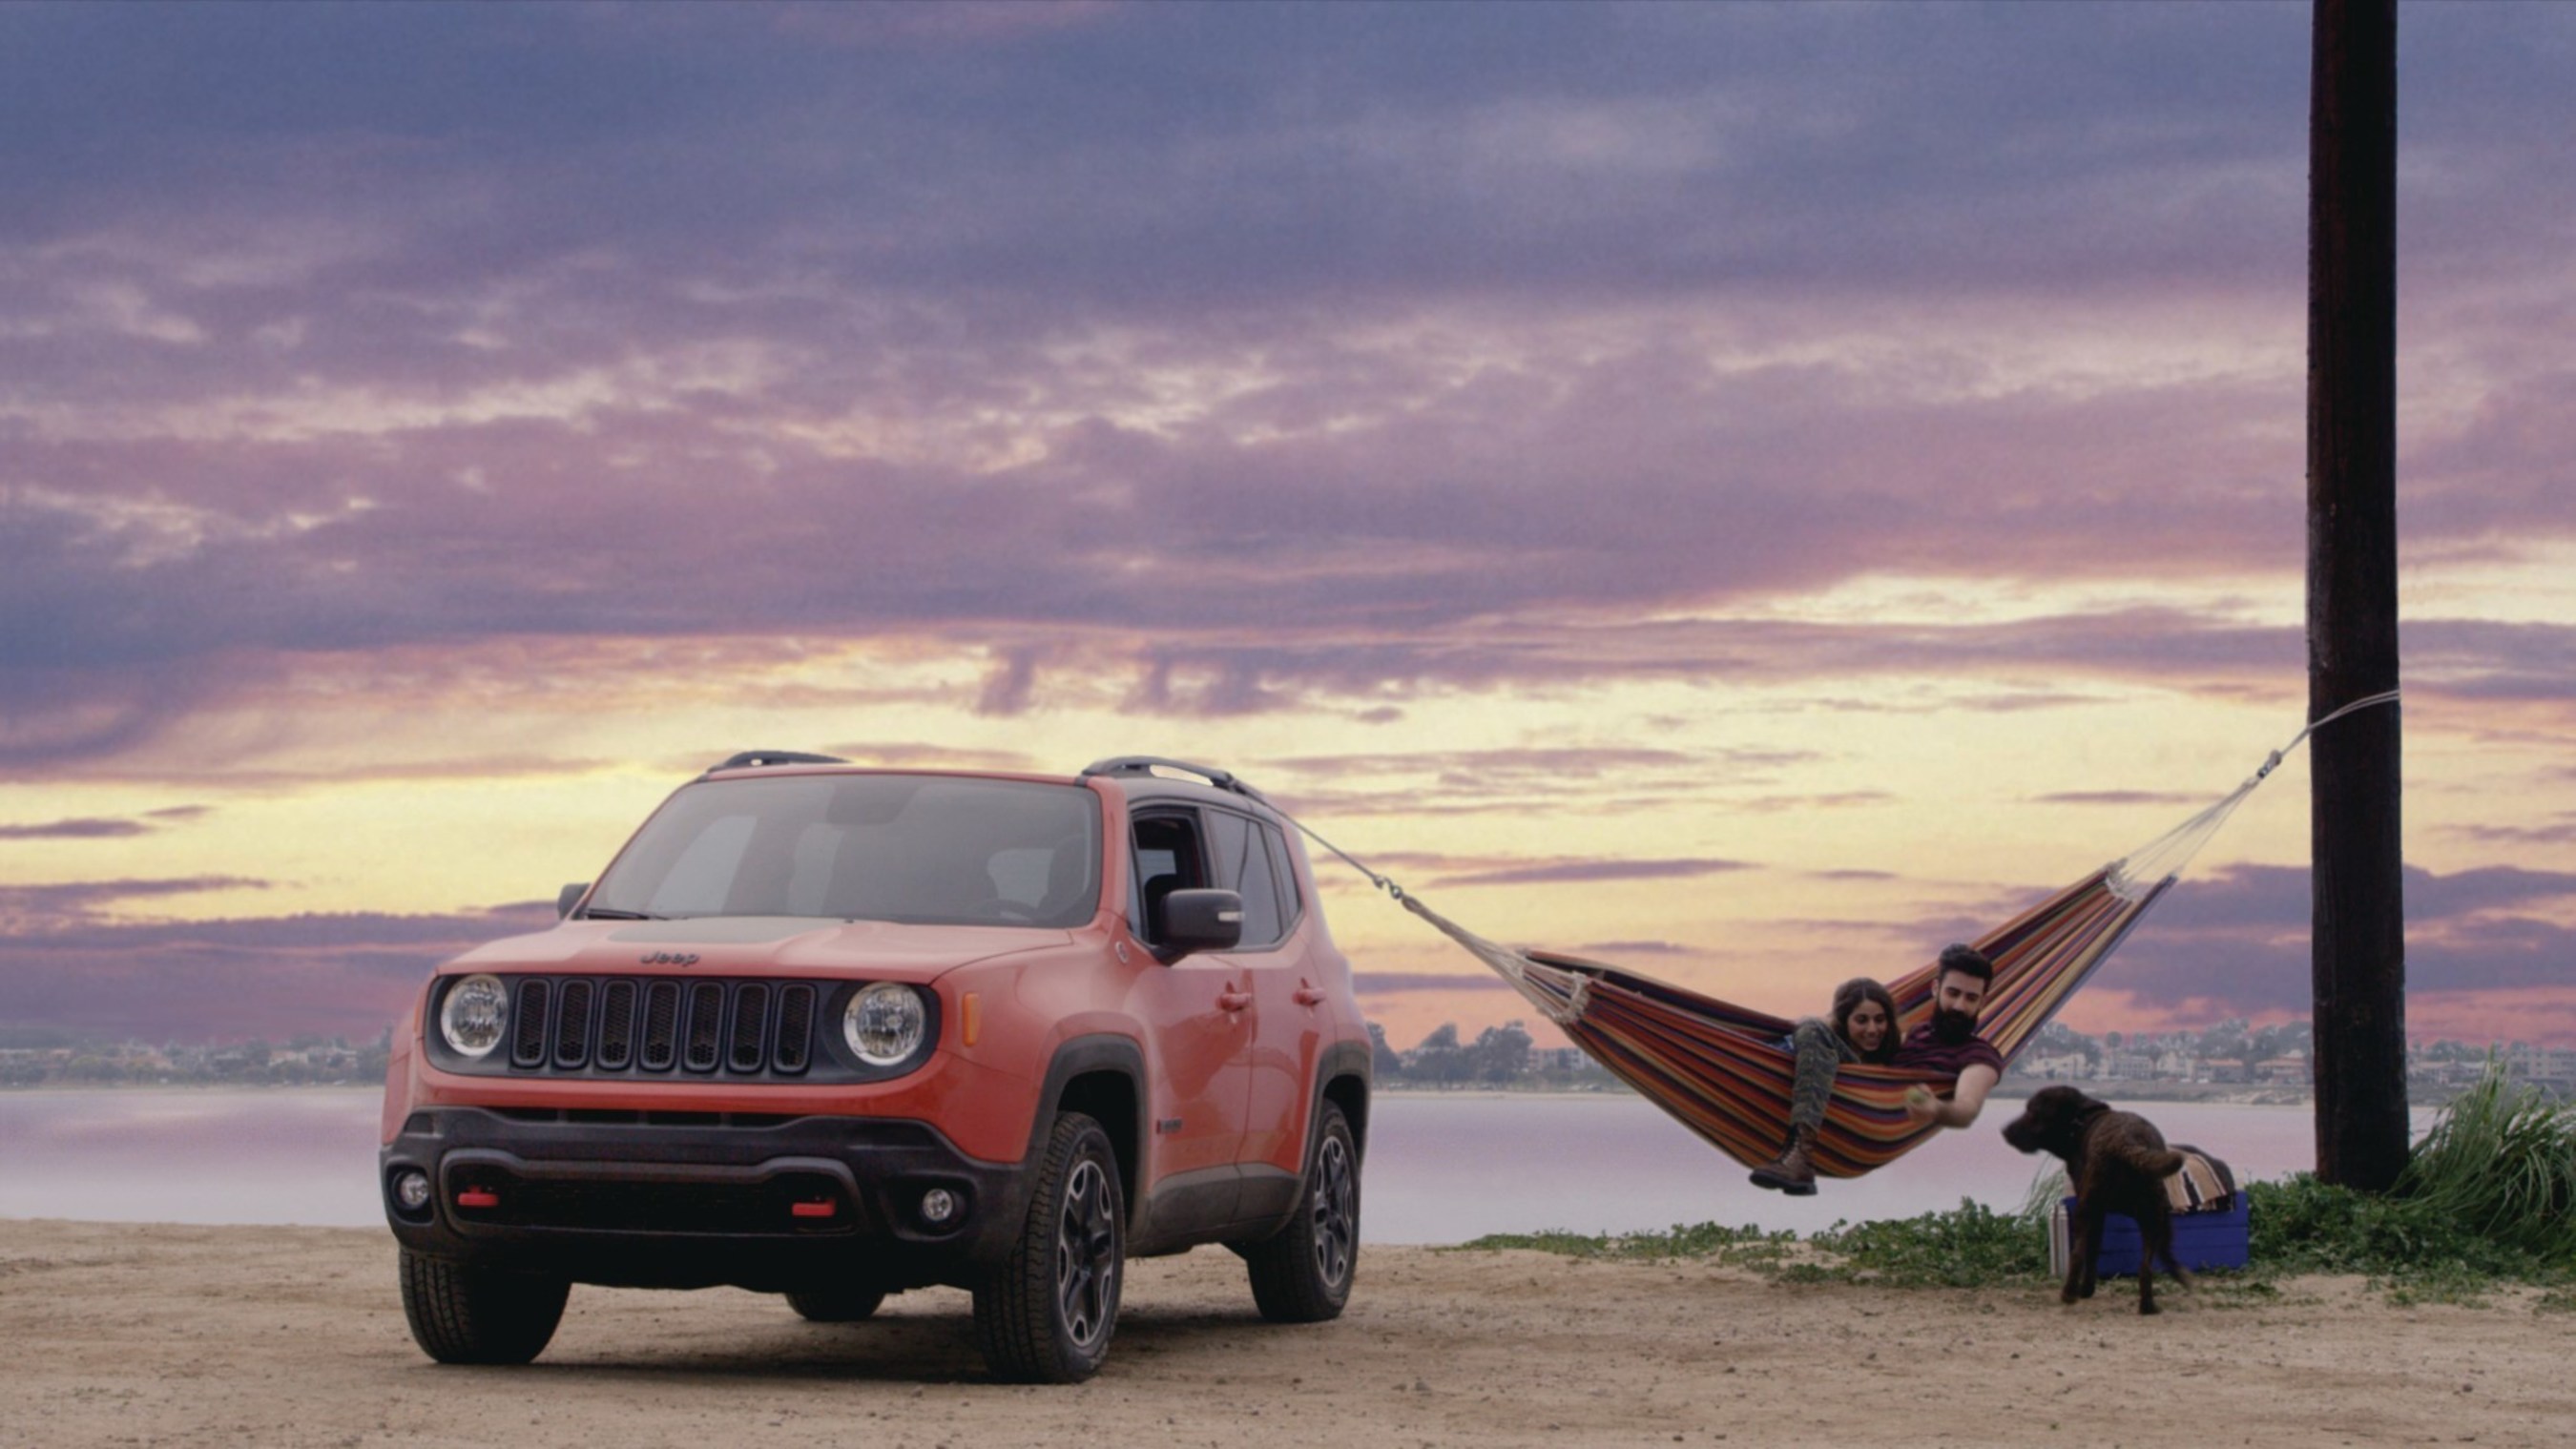 Jeep Renegade campaign launches with "Renegades" song by X Ambassadors